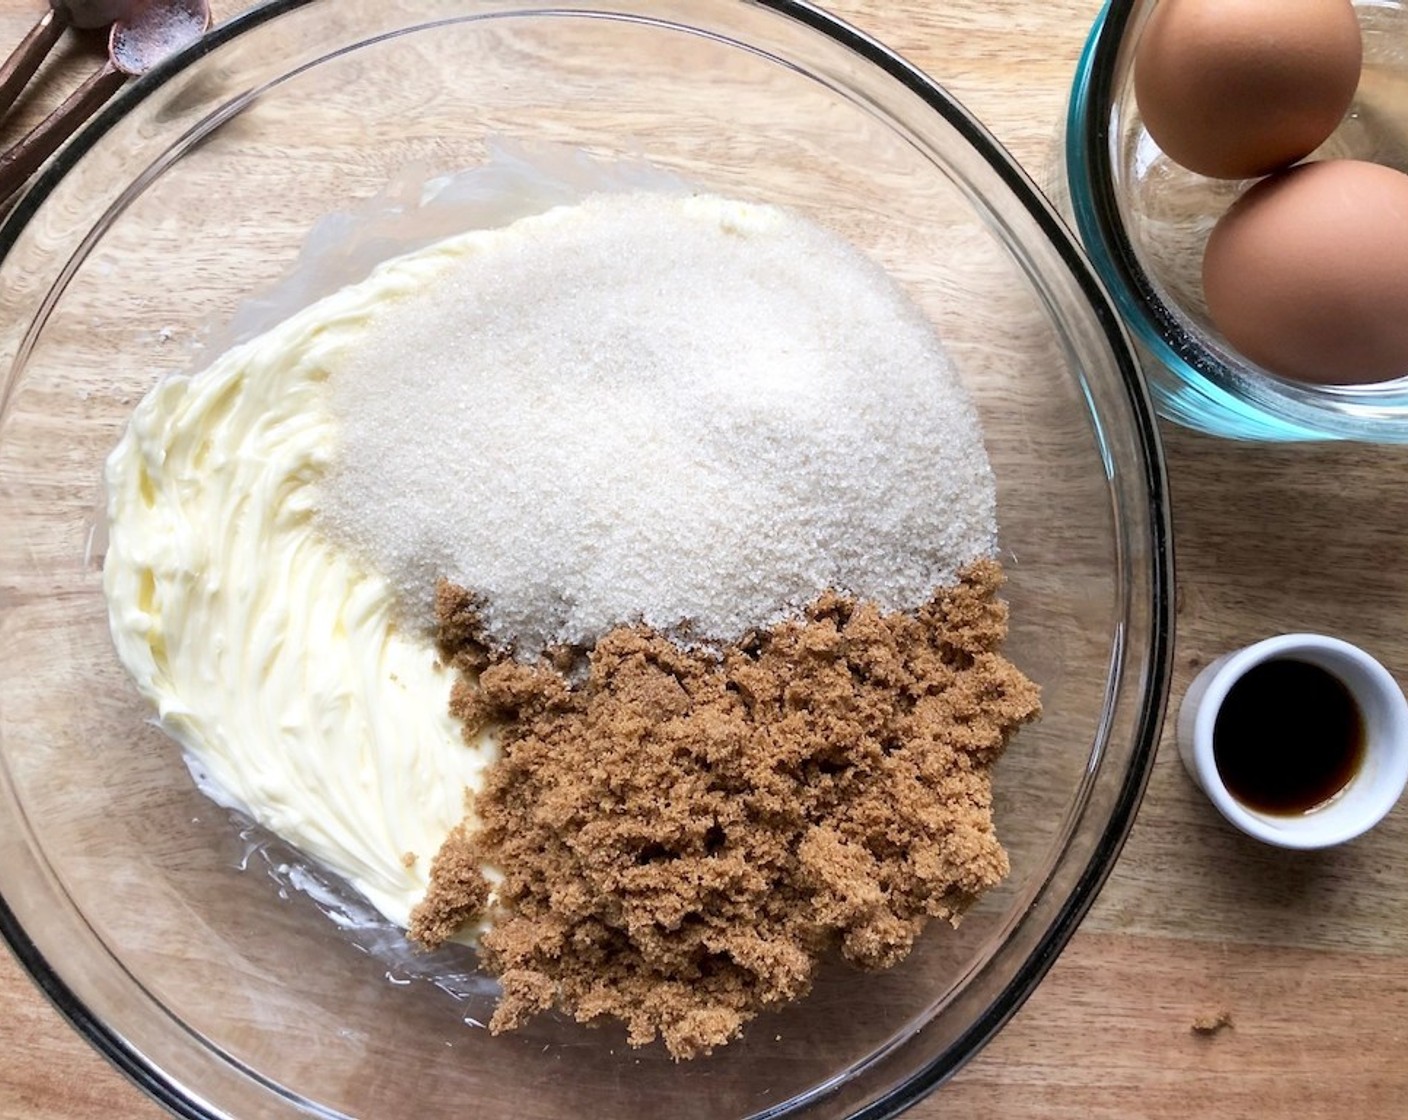 step 2 In an electric mixer fitted with the paddle attachment, beat the Unsalted Butter (1 cup), Dark Brown Sugar (3/4 cup), and Granulated Sugar (3/4 cup) on medium-high speed for 3 minutes, until light and fluffy.